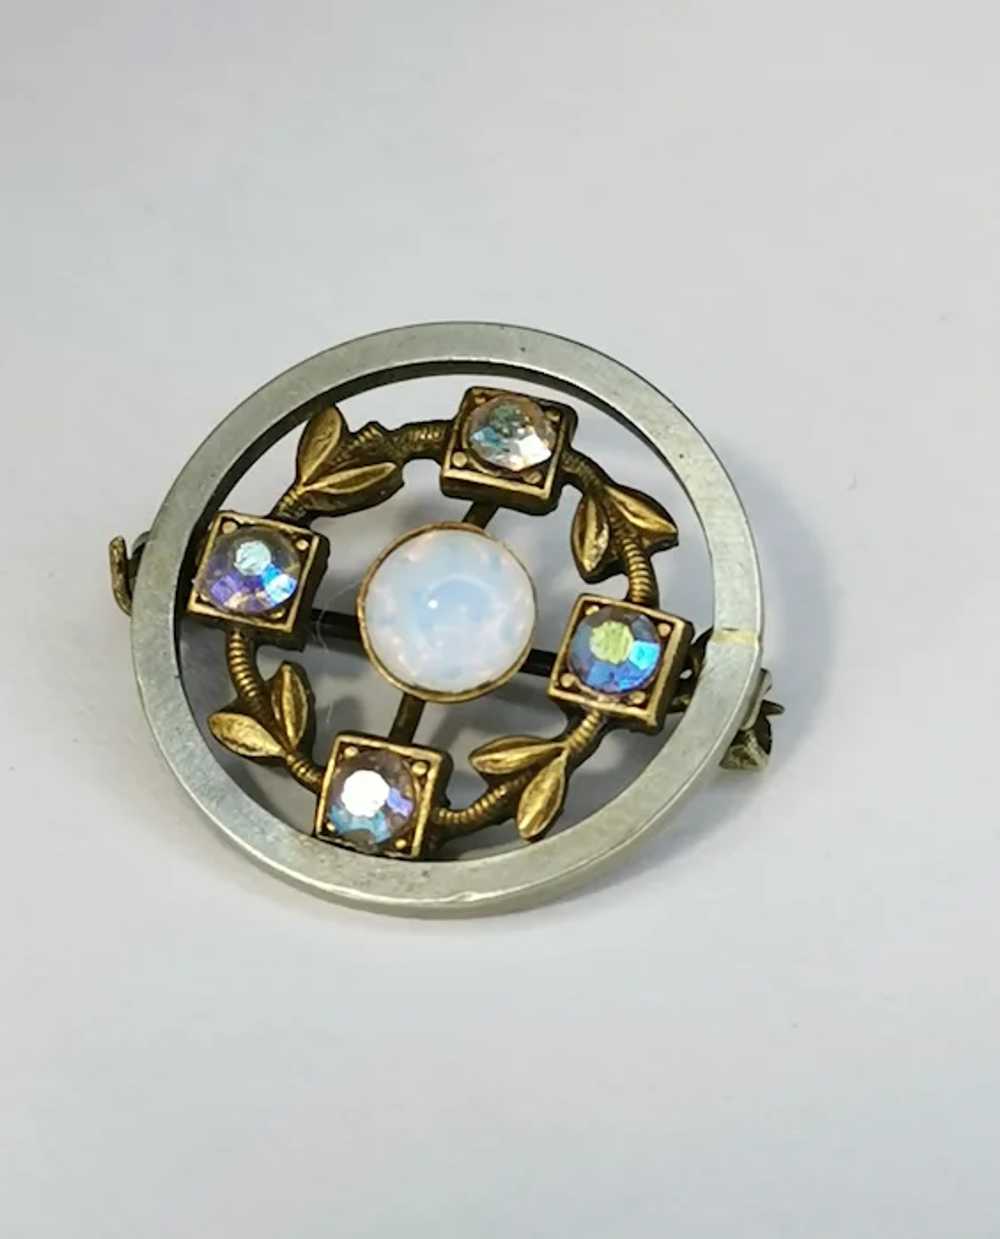 Two Tone Brooch with Opal and Paste Crystal - image 10